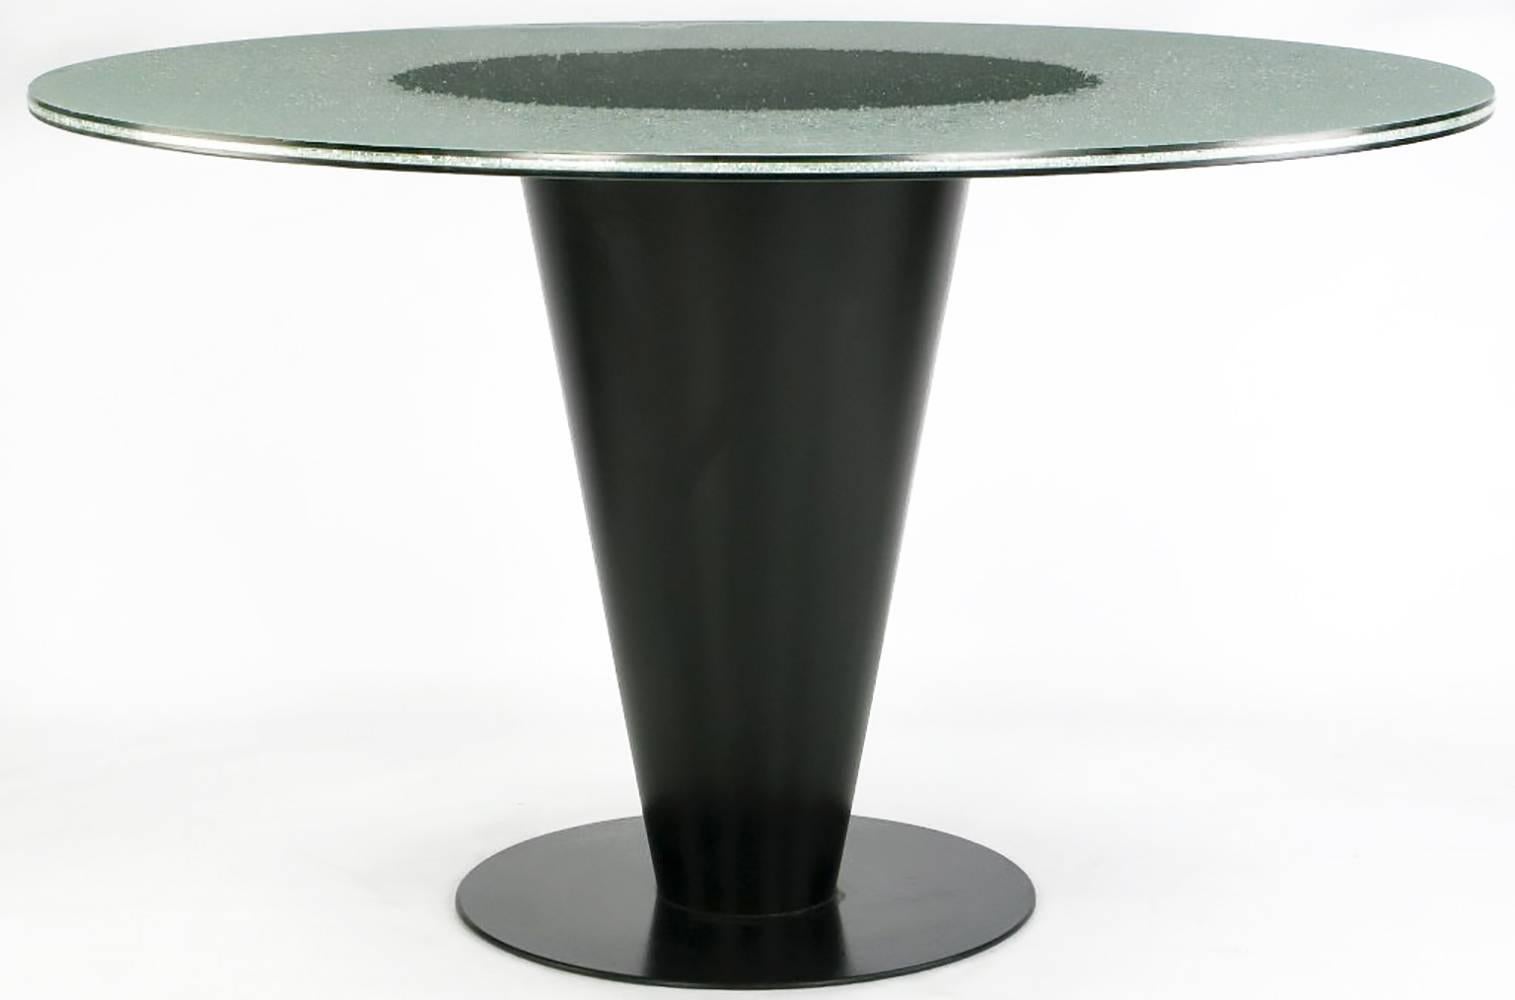 Joe D'urso designed and Bieffeplast manufactured, conical dining table with crackled three-piece glass top. Black enamel coated steel cone shaped table base supports a unique glass top. The 48